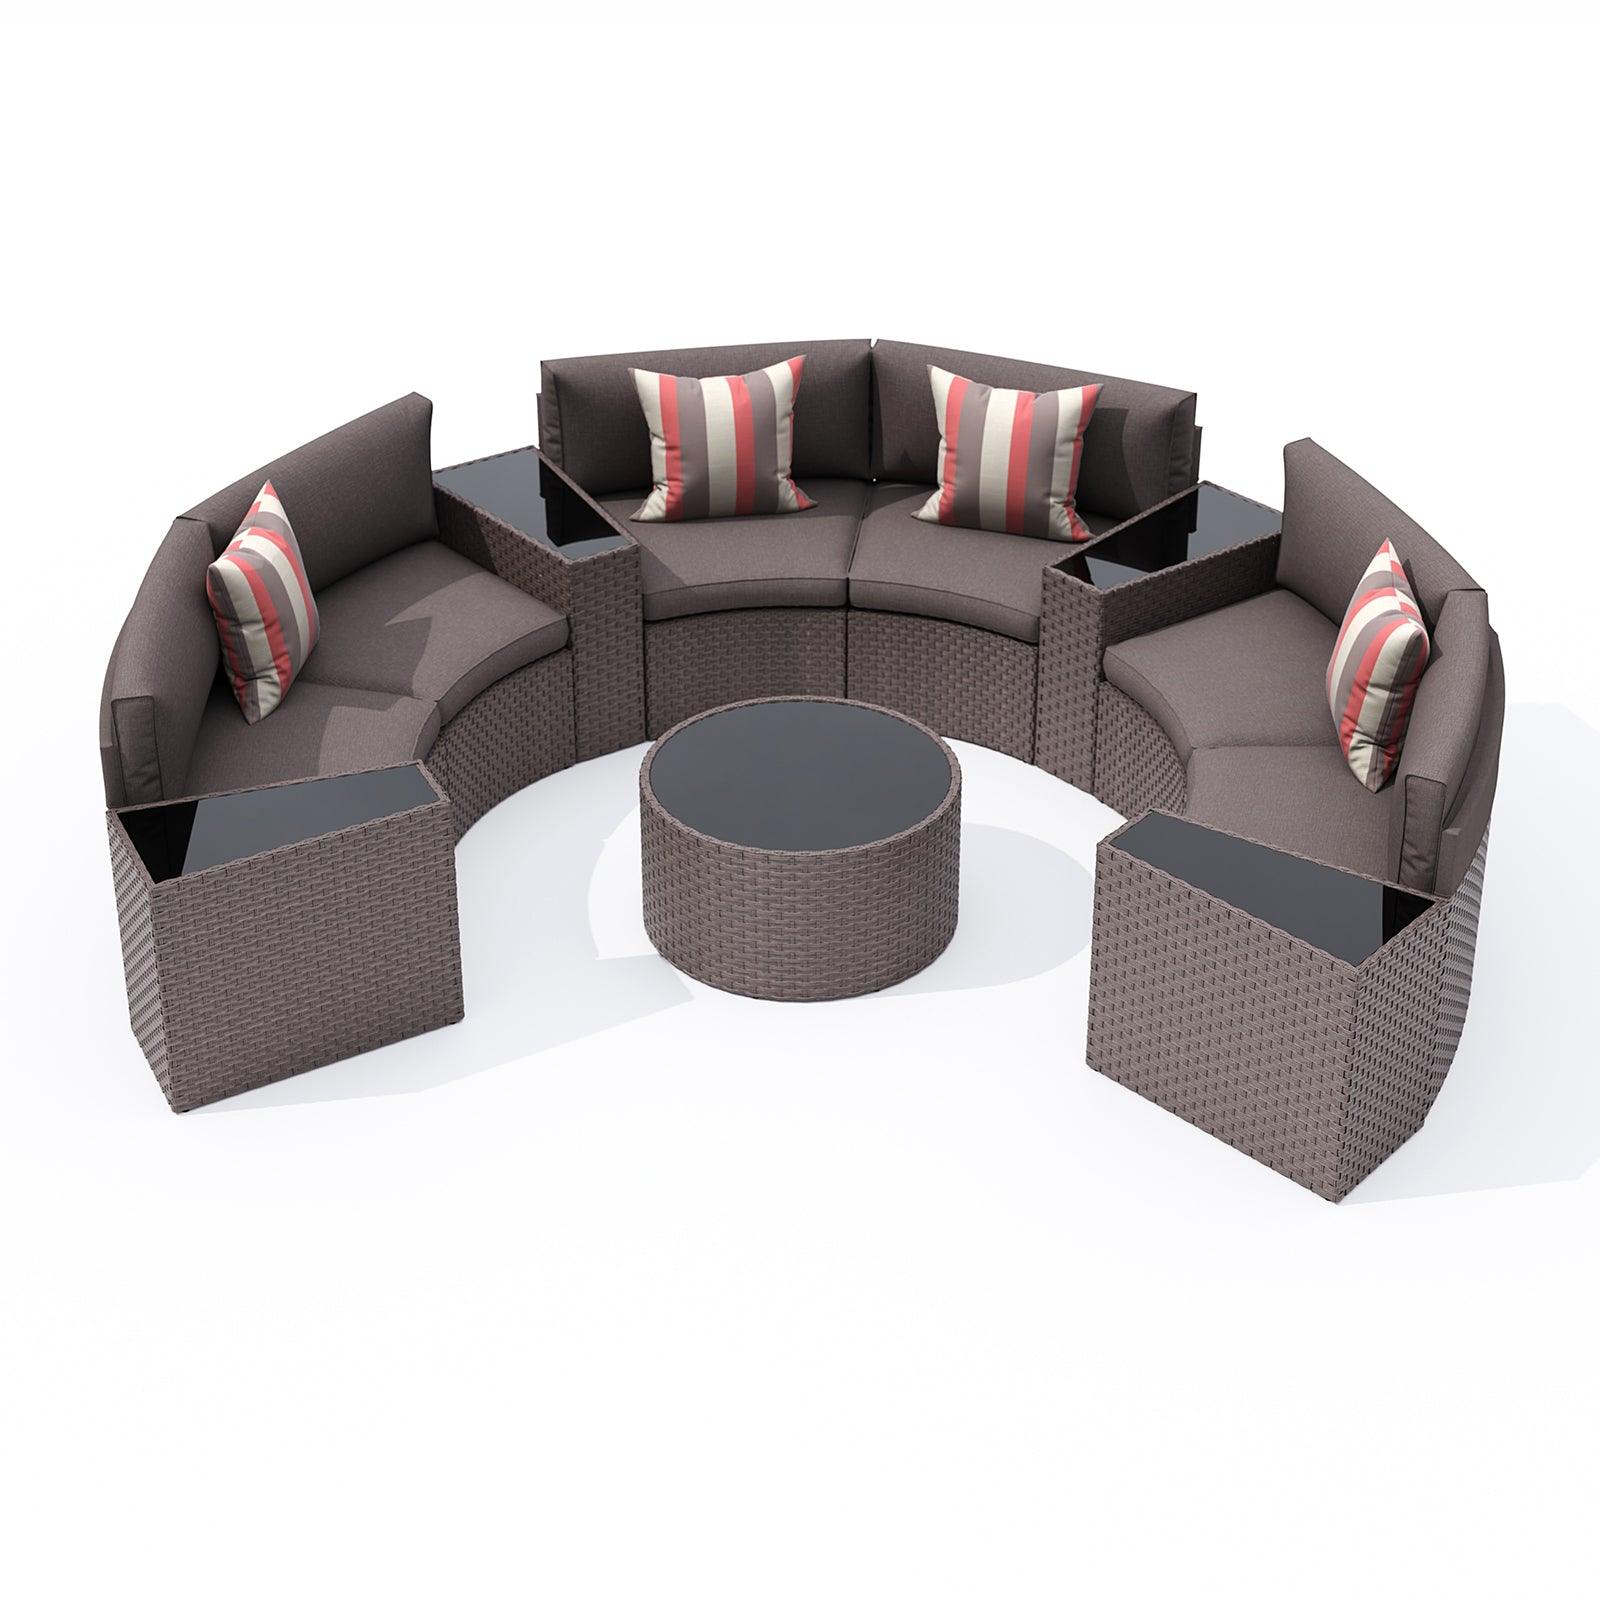 Halo II 11-pc. Outdoor Half-Moon Sectional Set, Taupe sale 